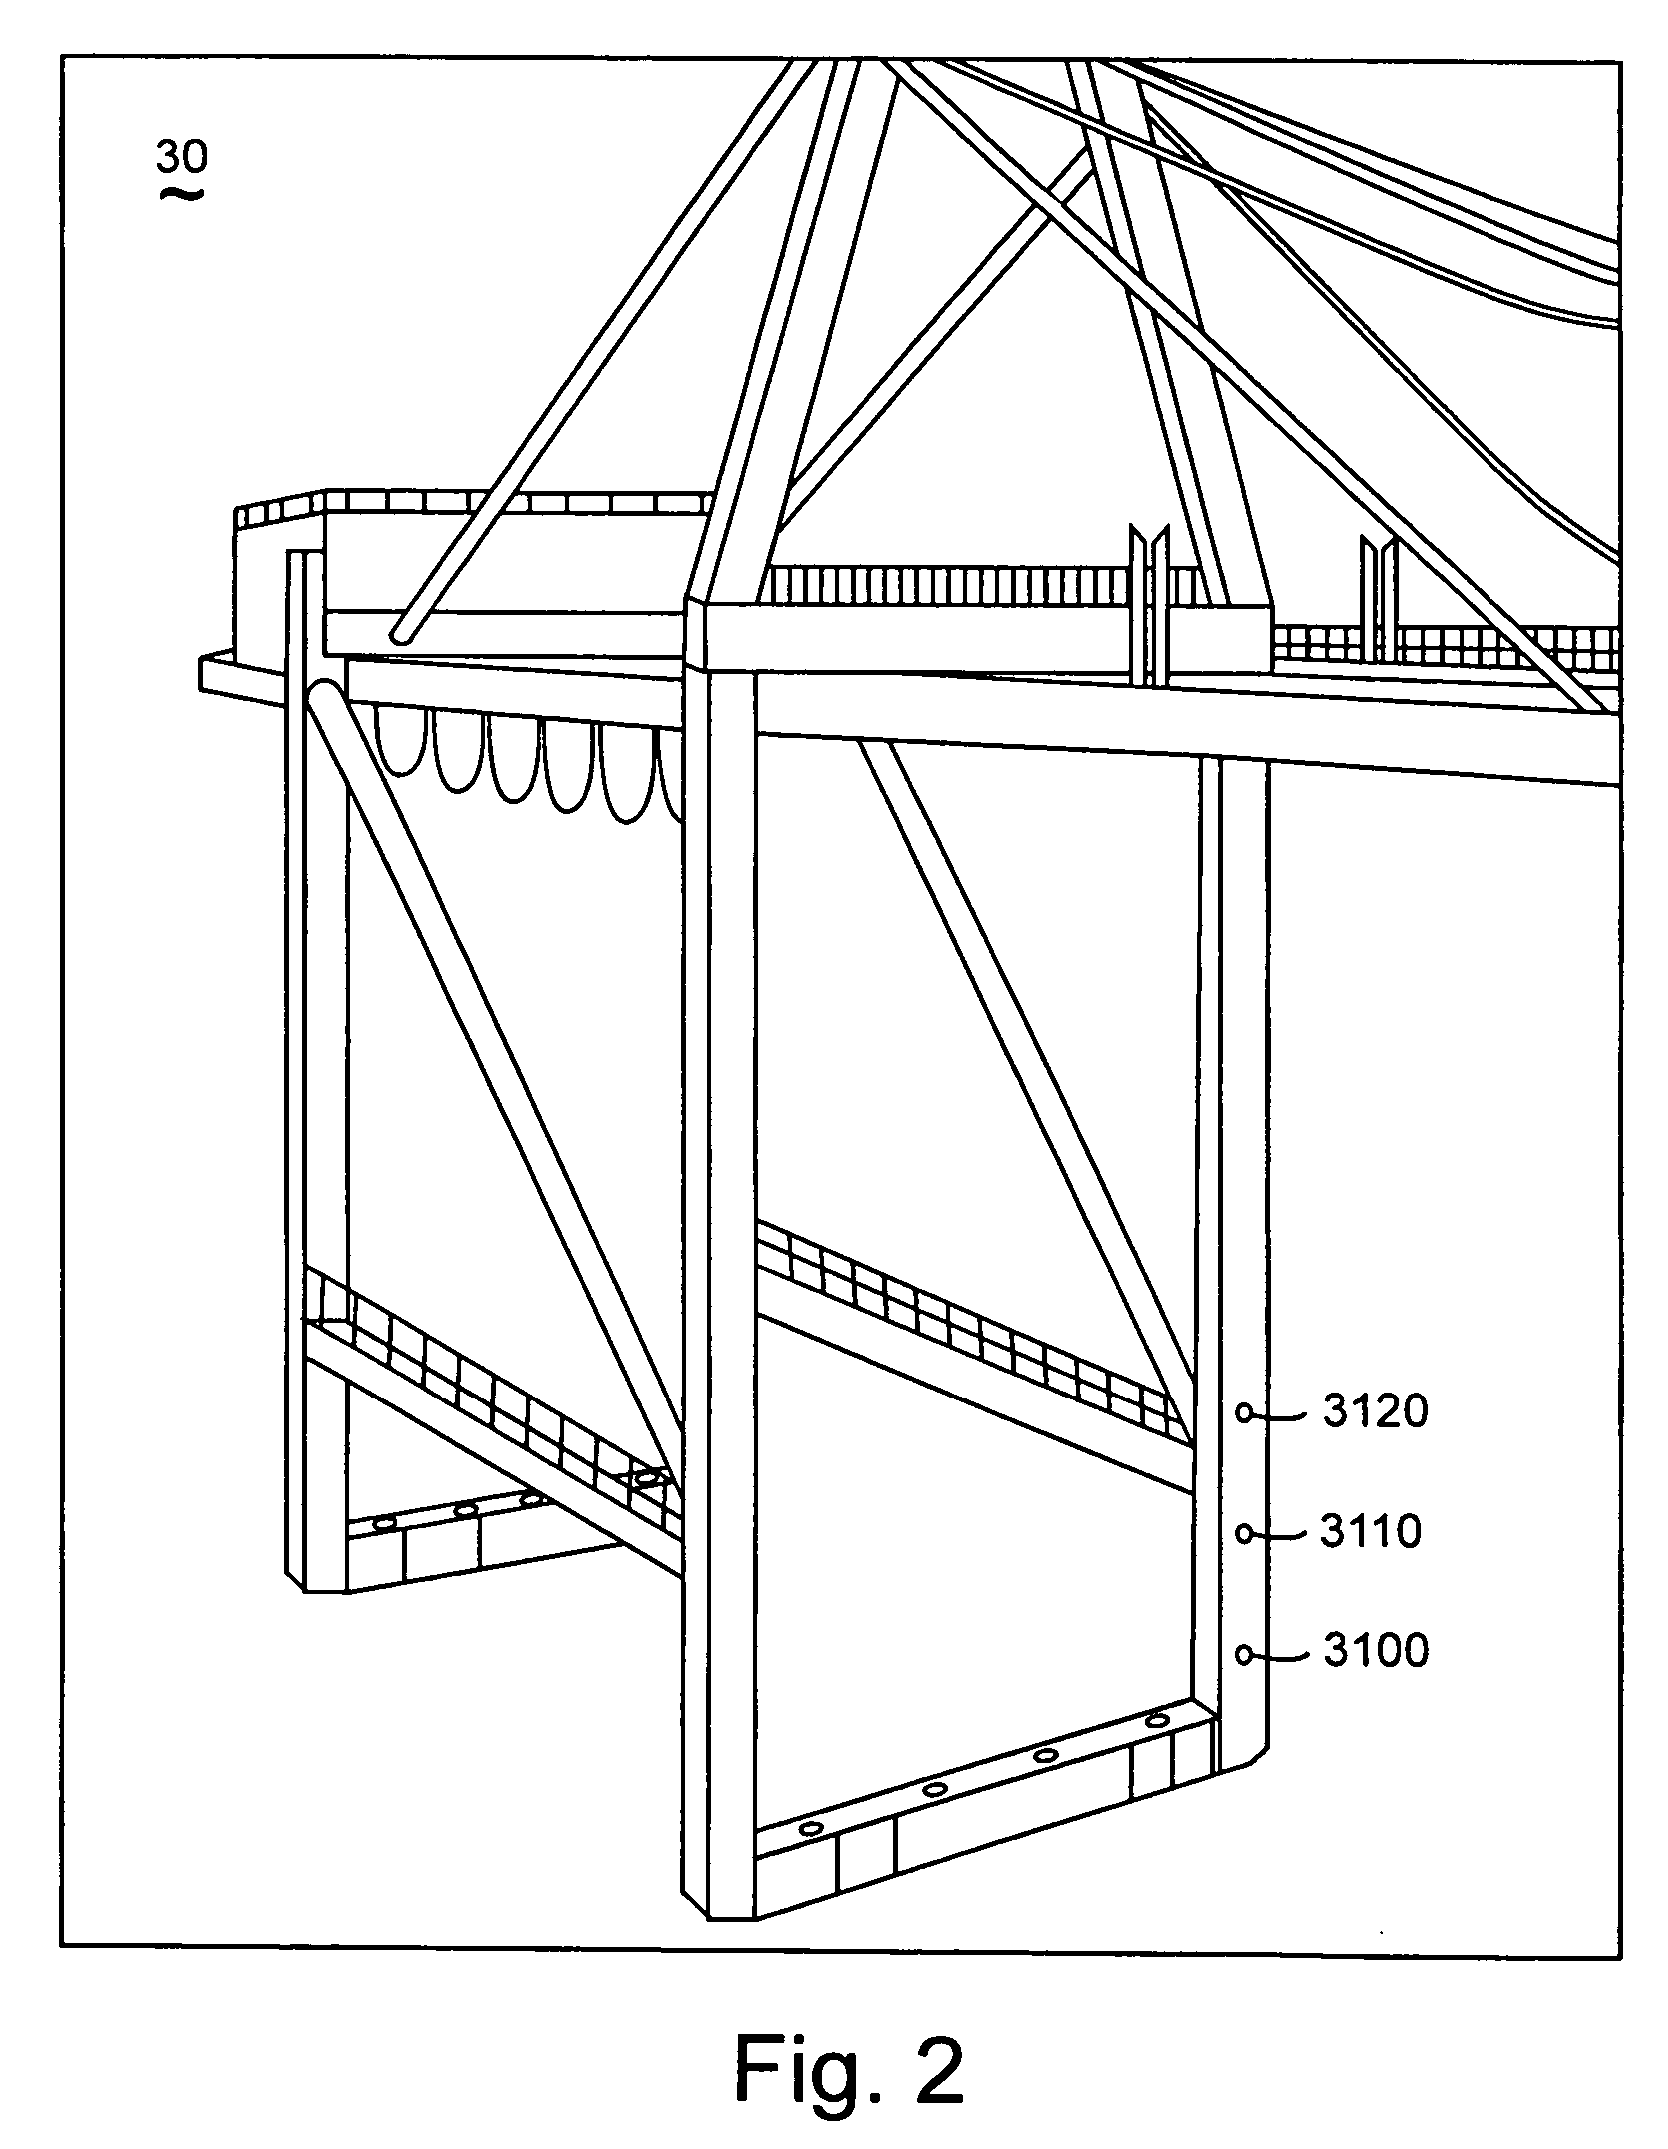 Method and apparatus using radio-location tags to report status for a container handler